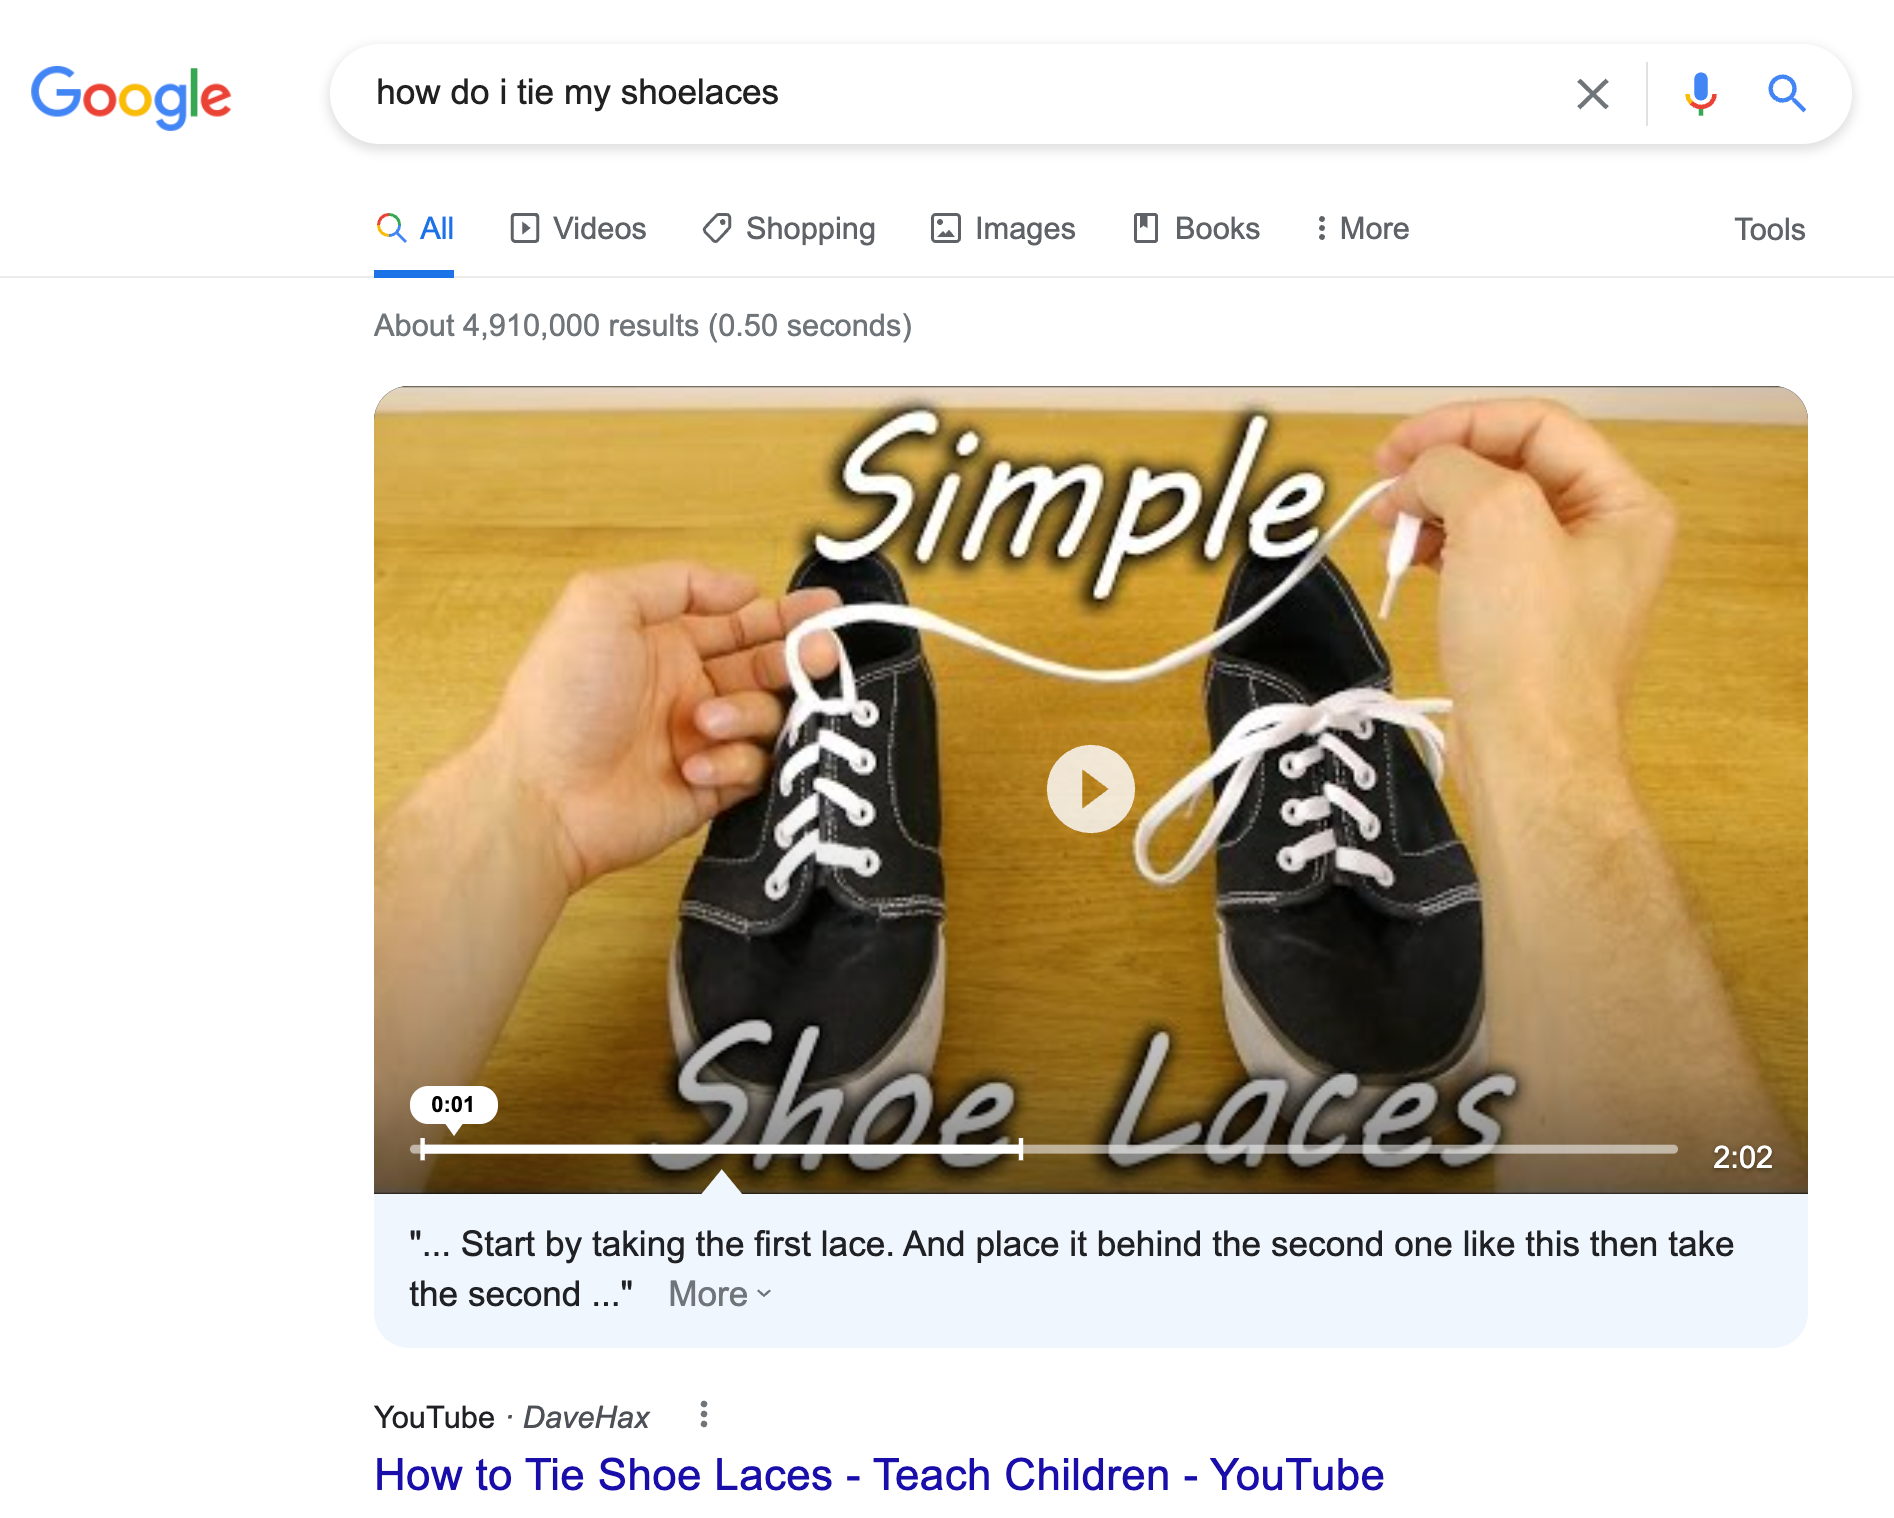 In response to our question, Google finds the exact (audio-to-text) answer to be “Start by taking the first lace. And place it behind the second one…", and highlights the exact part of the video that contains this extracted answer.